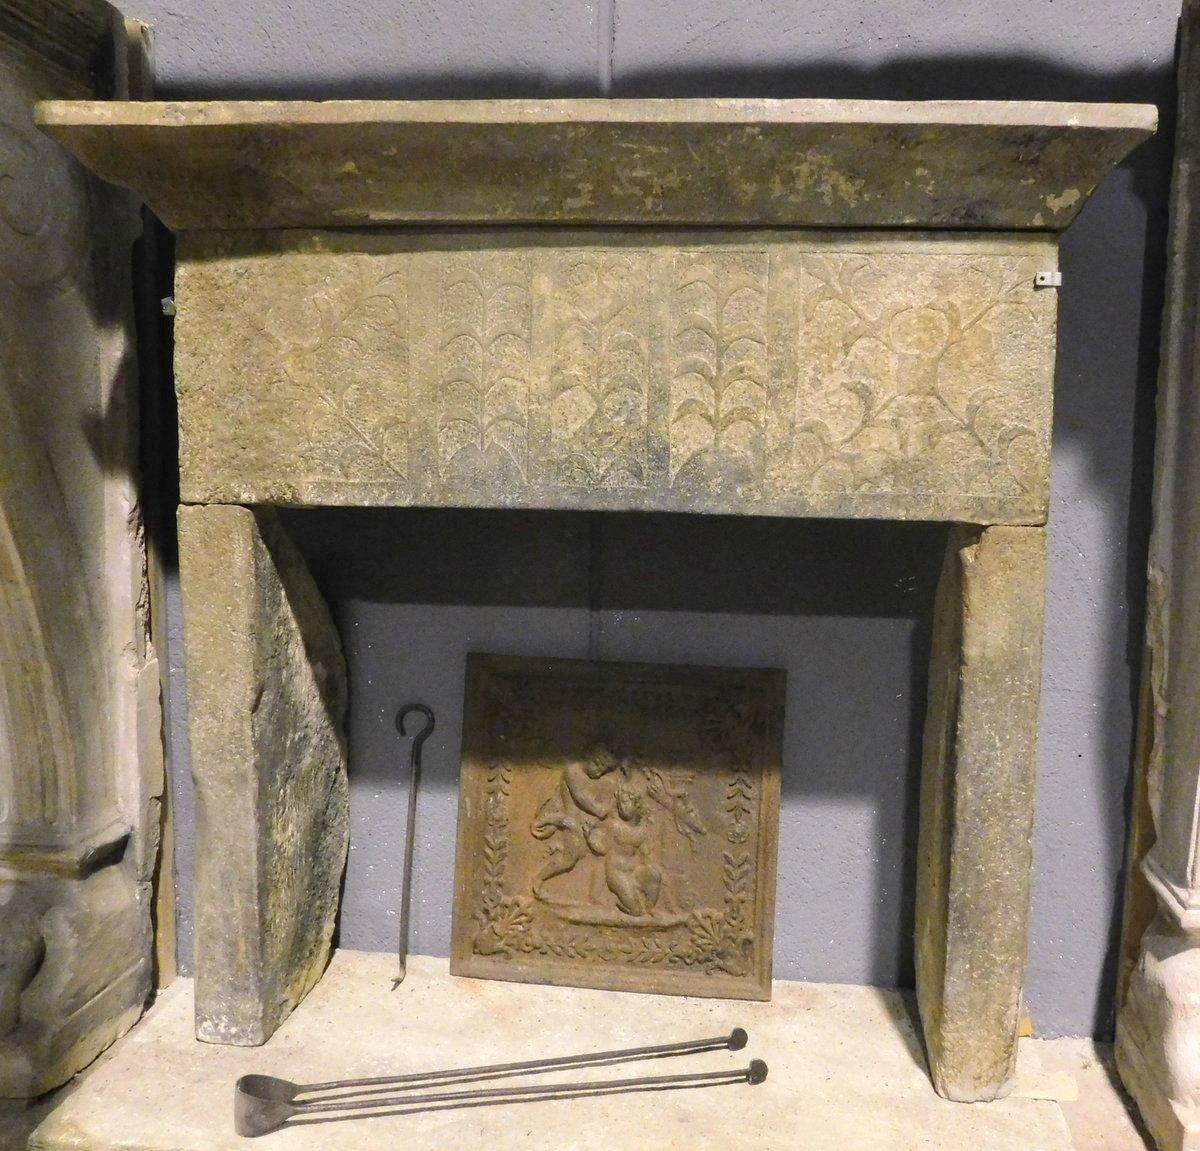 Antique fireplace in gray stone from the 15th century, with relief decorations in nature and floral, hand carved and very old. Excellent patina, it comes from a famous area of Italy called Abruzzo, typical of the area in the 1400s. Very charming and